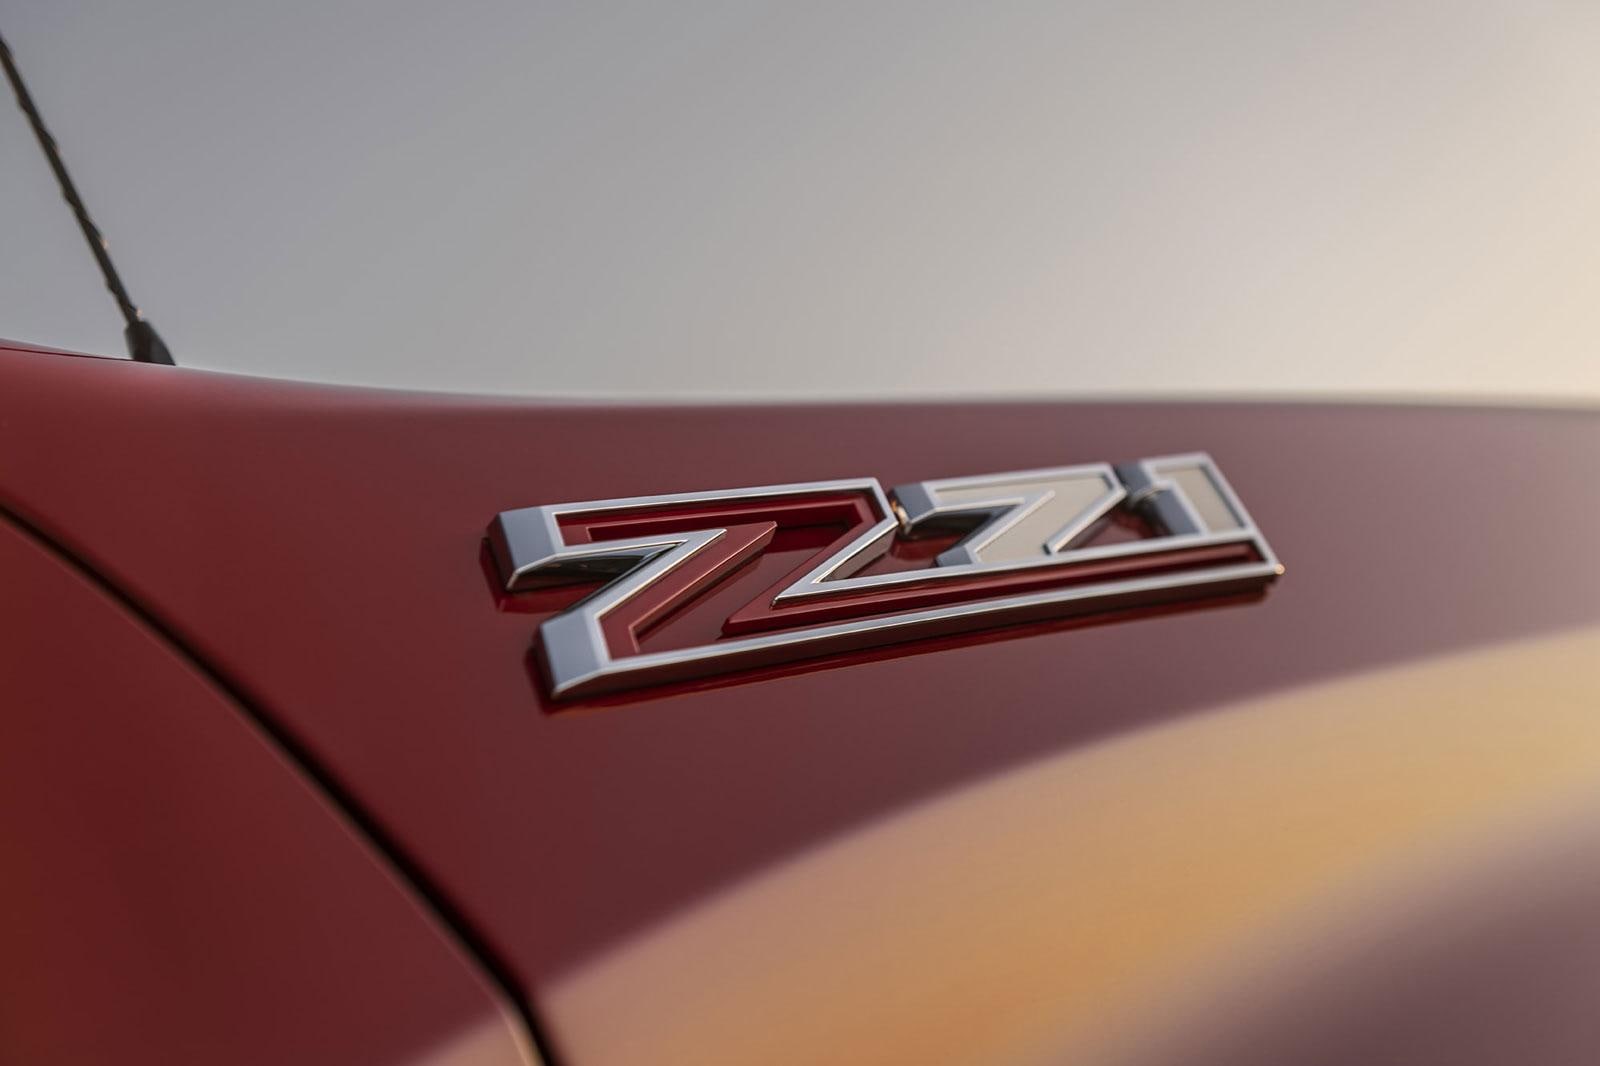 Red and silver Z71 emblem on a red Chevy Silverado